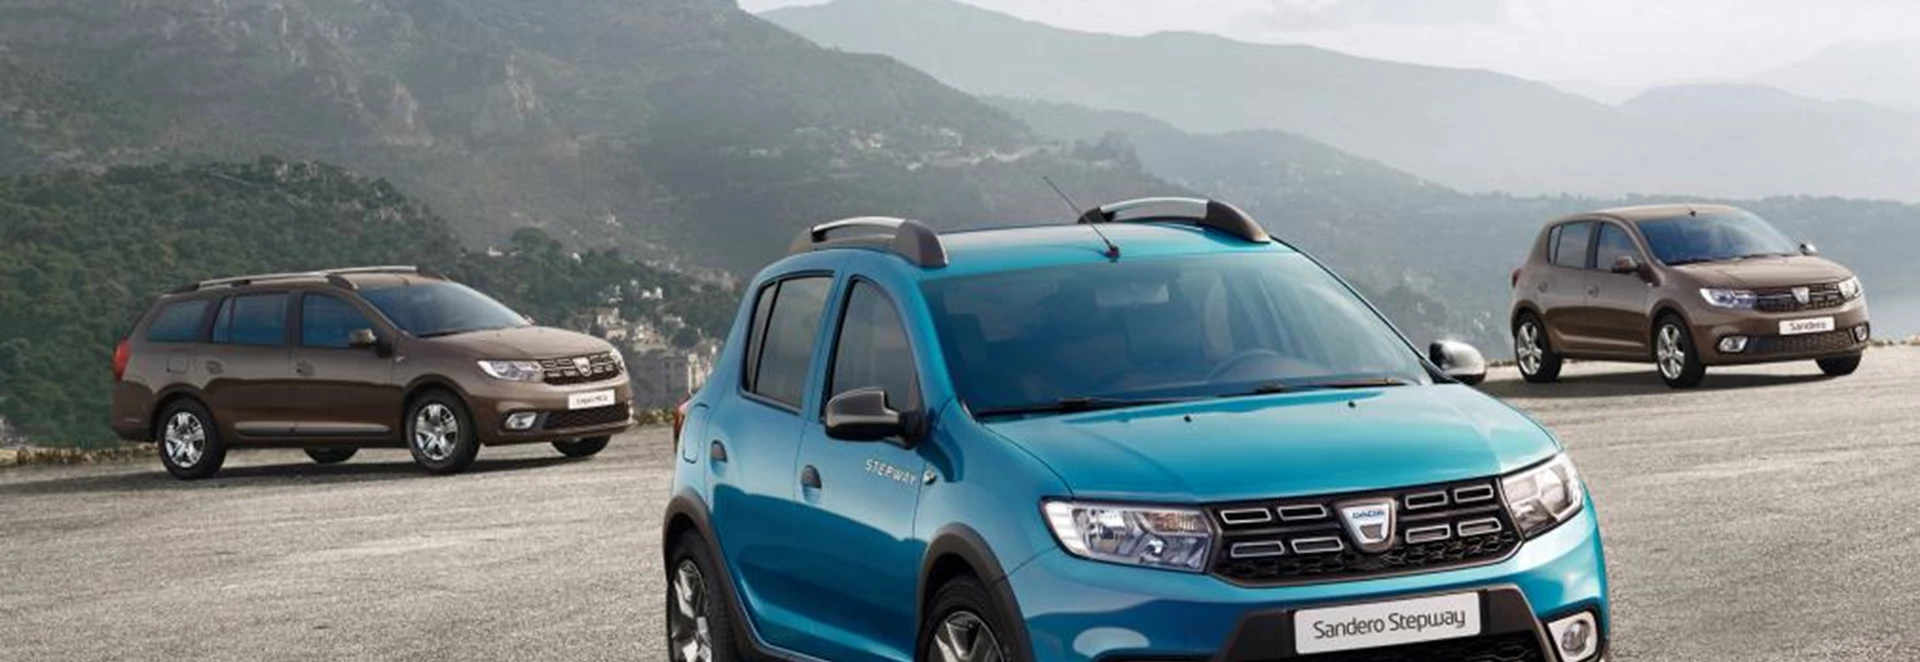 Pricing for facelifted Dacia cars confirmed